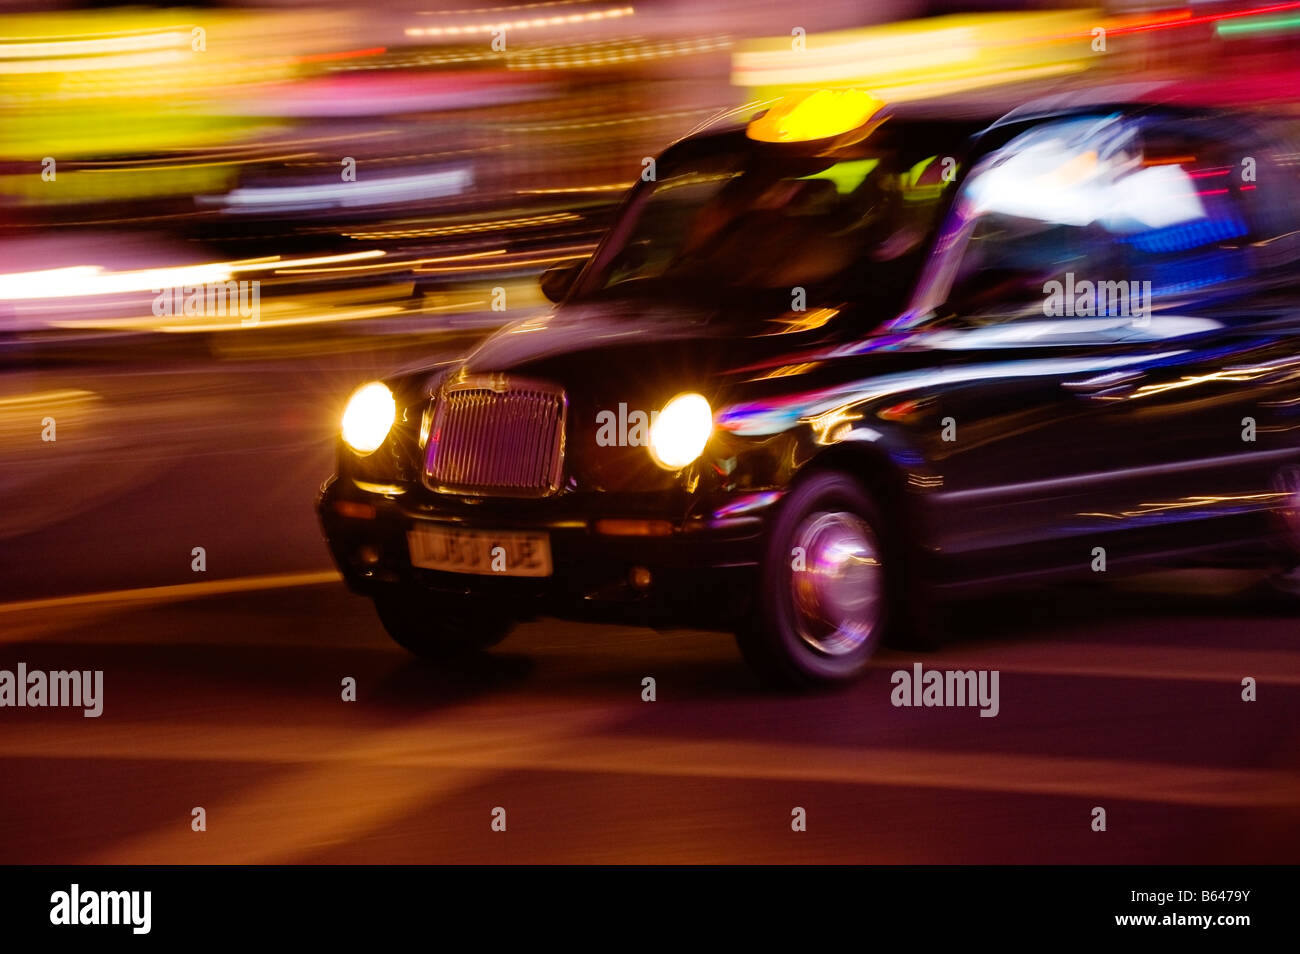 London taxi at night with motion blur Stock Photo